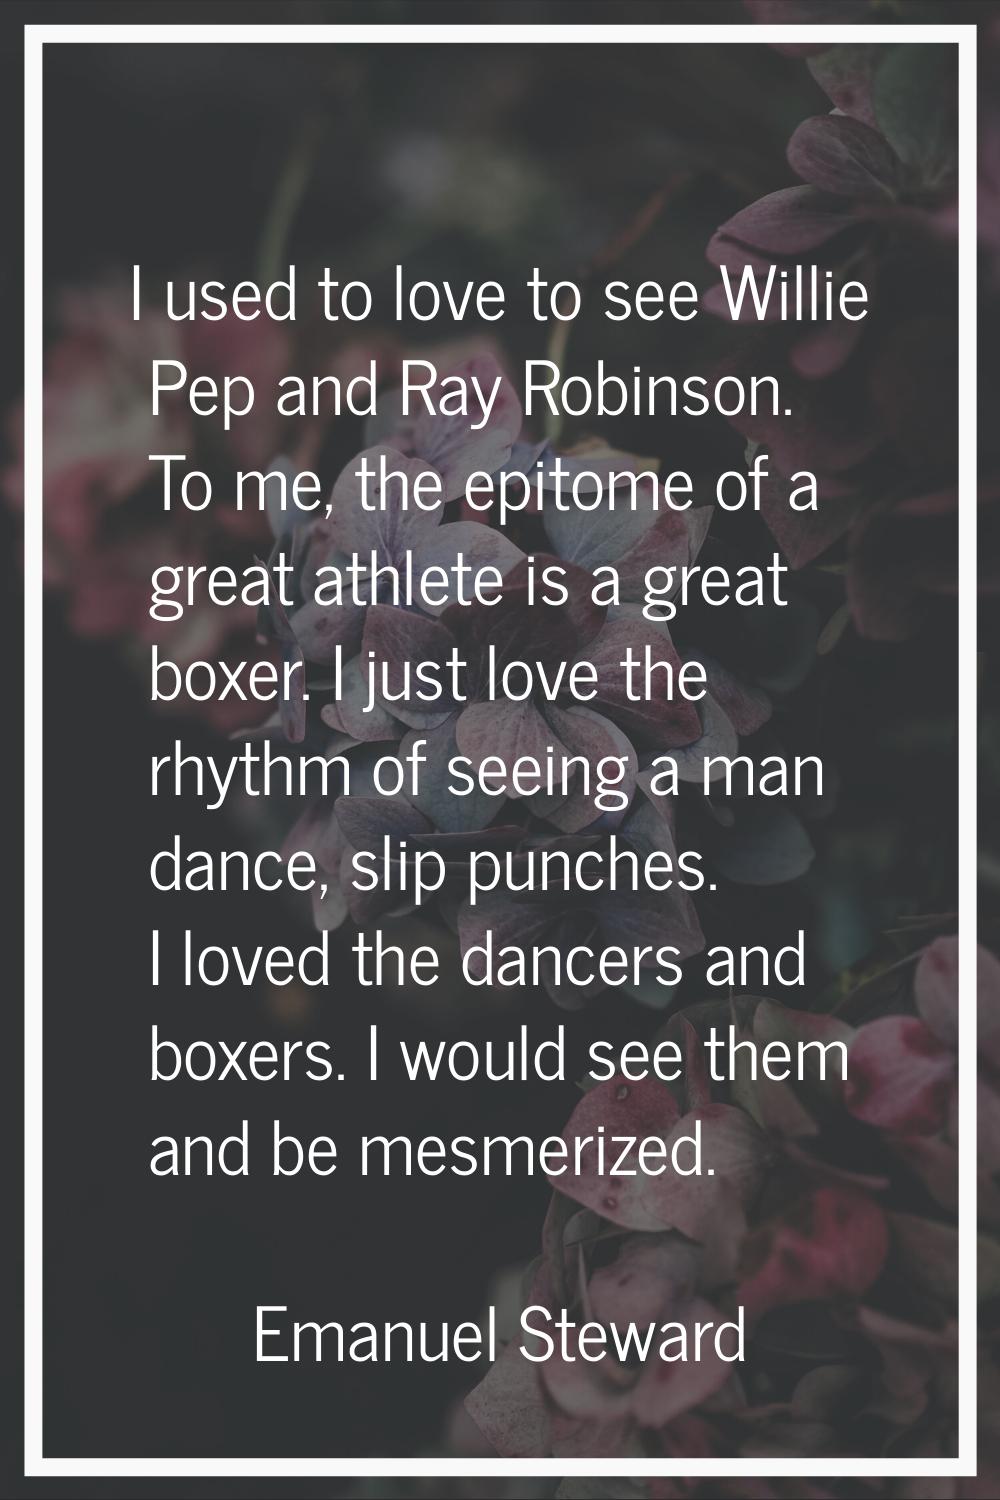 I used to love to see Willie Pep and Ray Robinson. To me, the epitome of a great athlete is a great